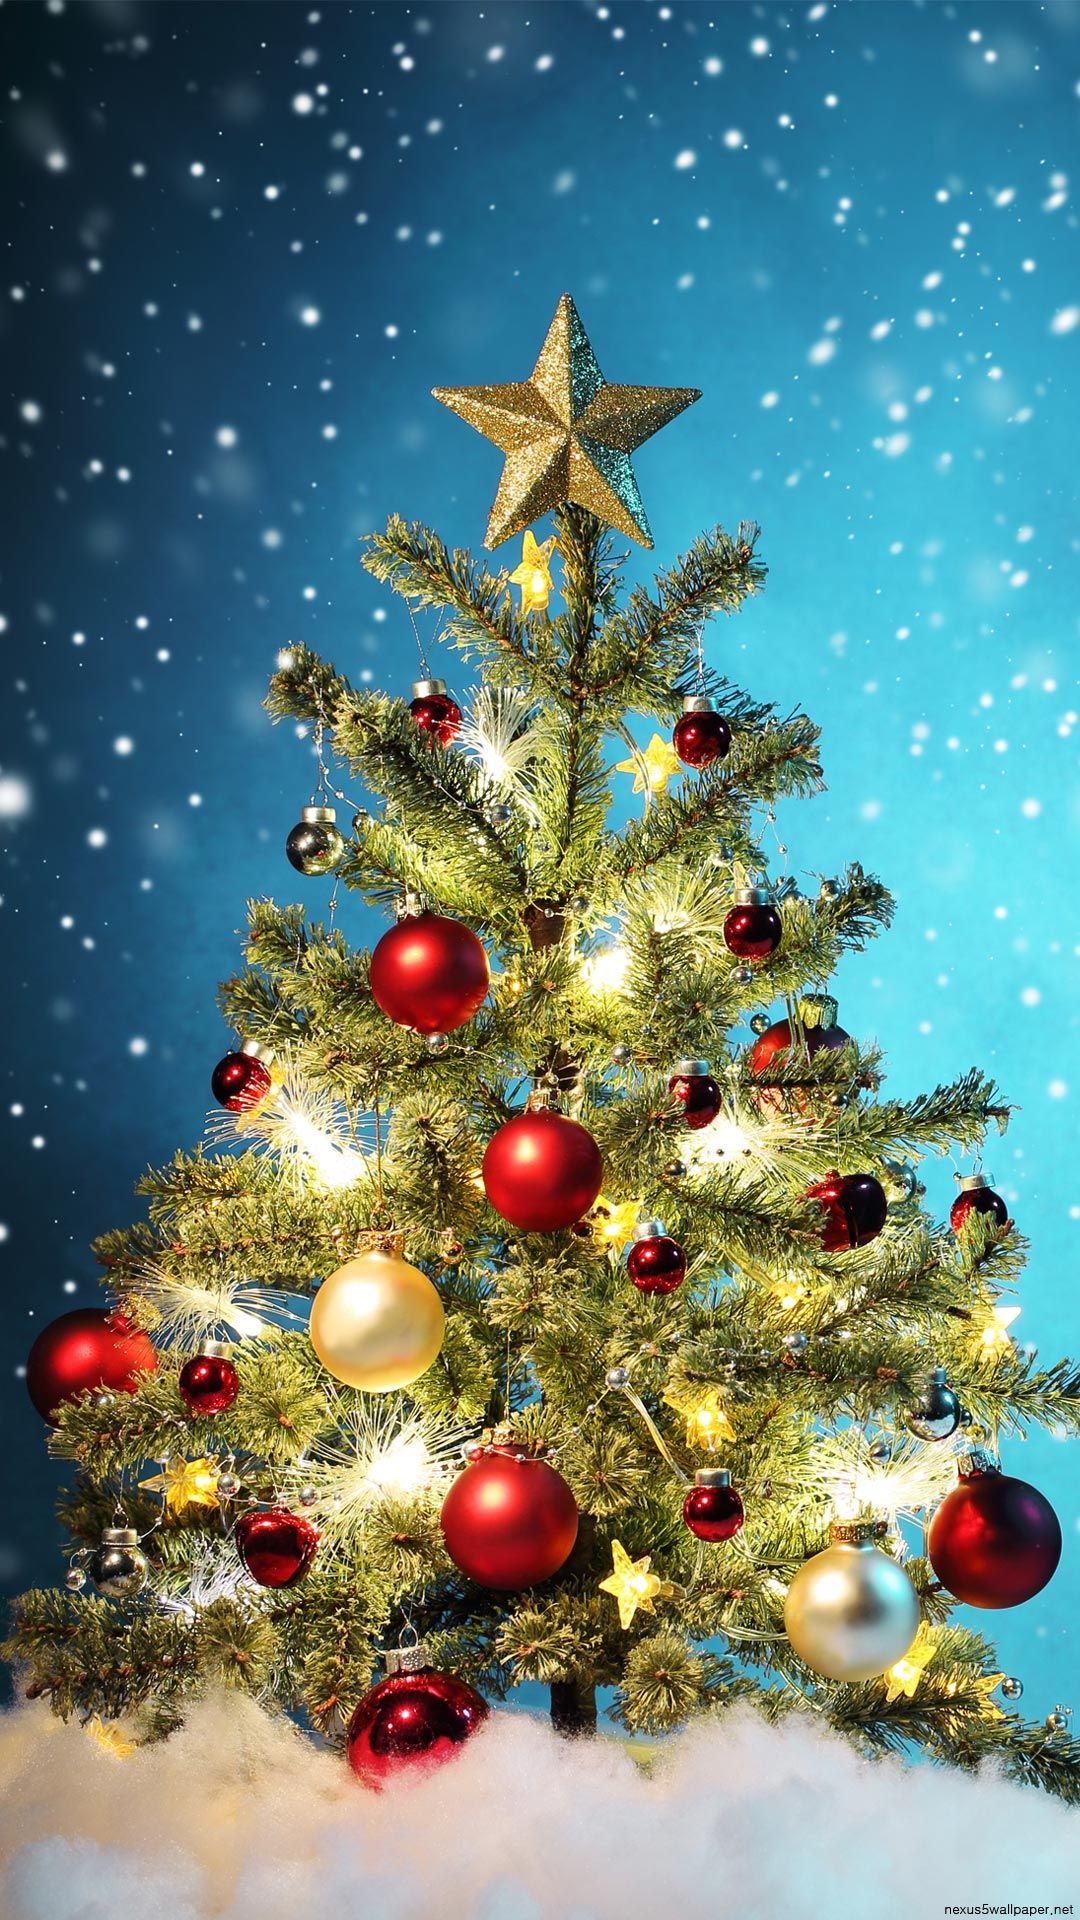 Christmas Tree Iphone Wallpapers